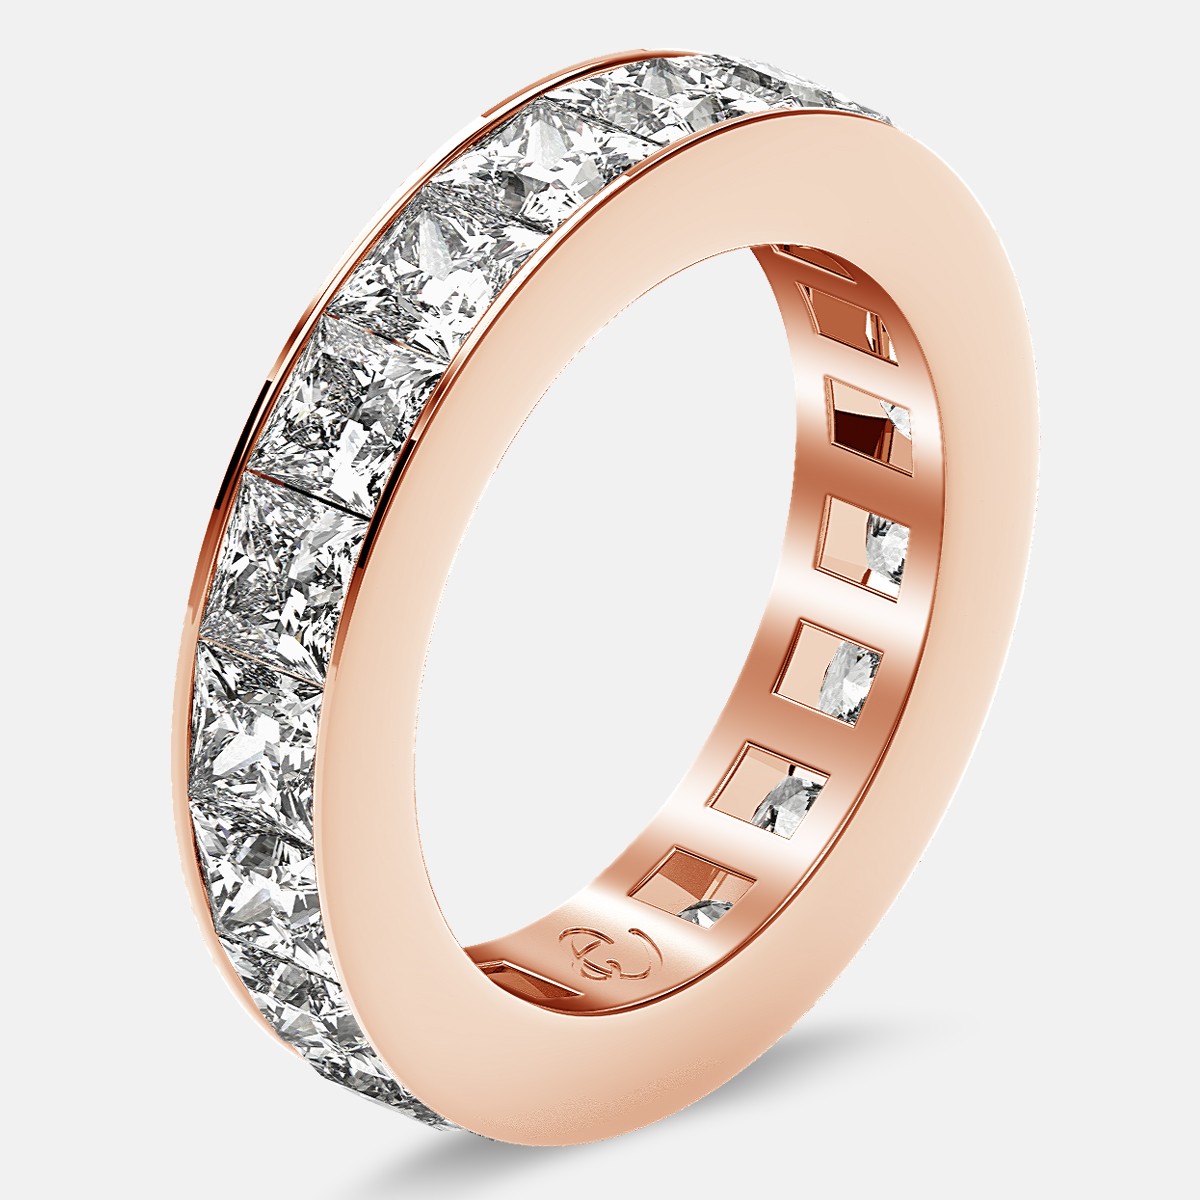 Eternity Ring with Channel Set Princess Cut Diamonds in 18k Rose Gold